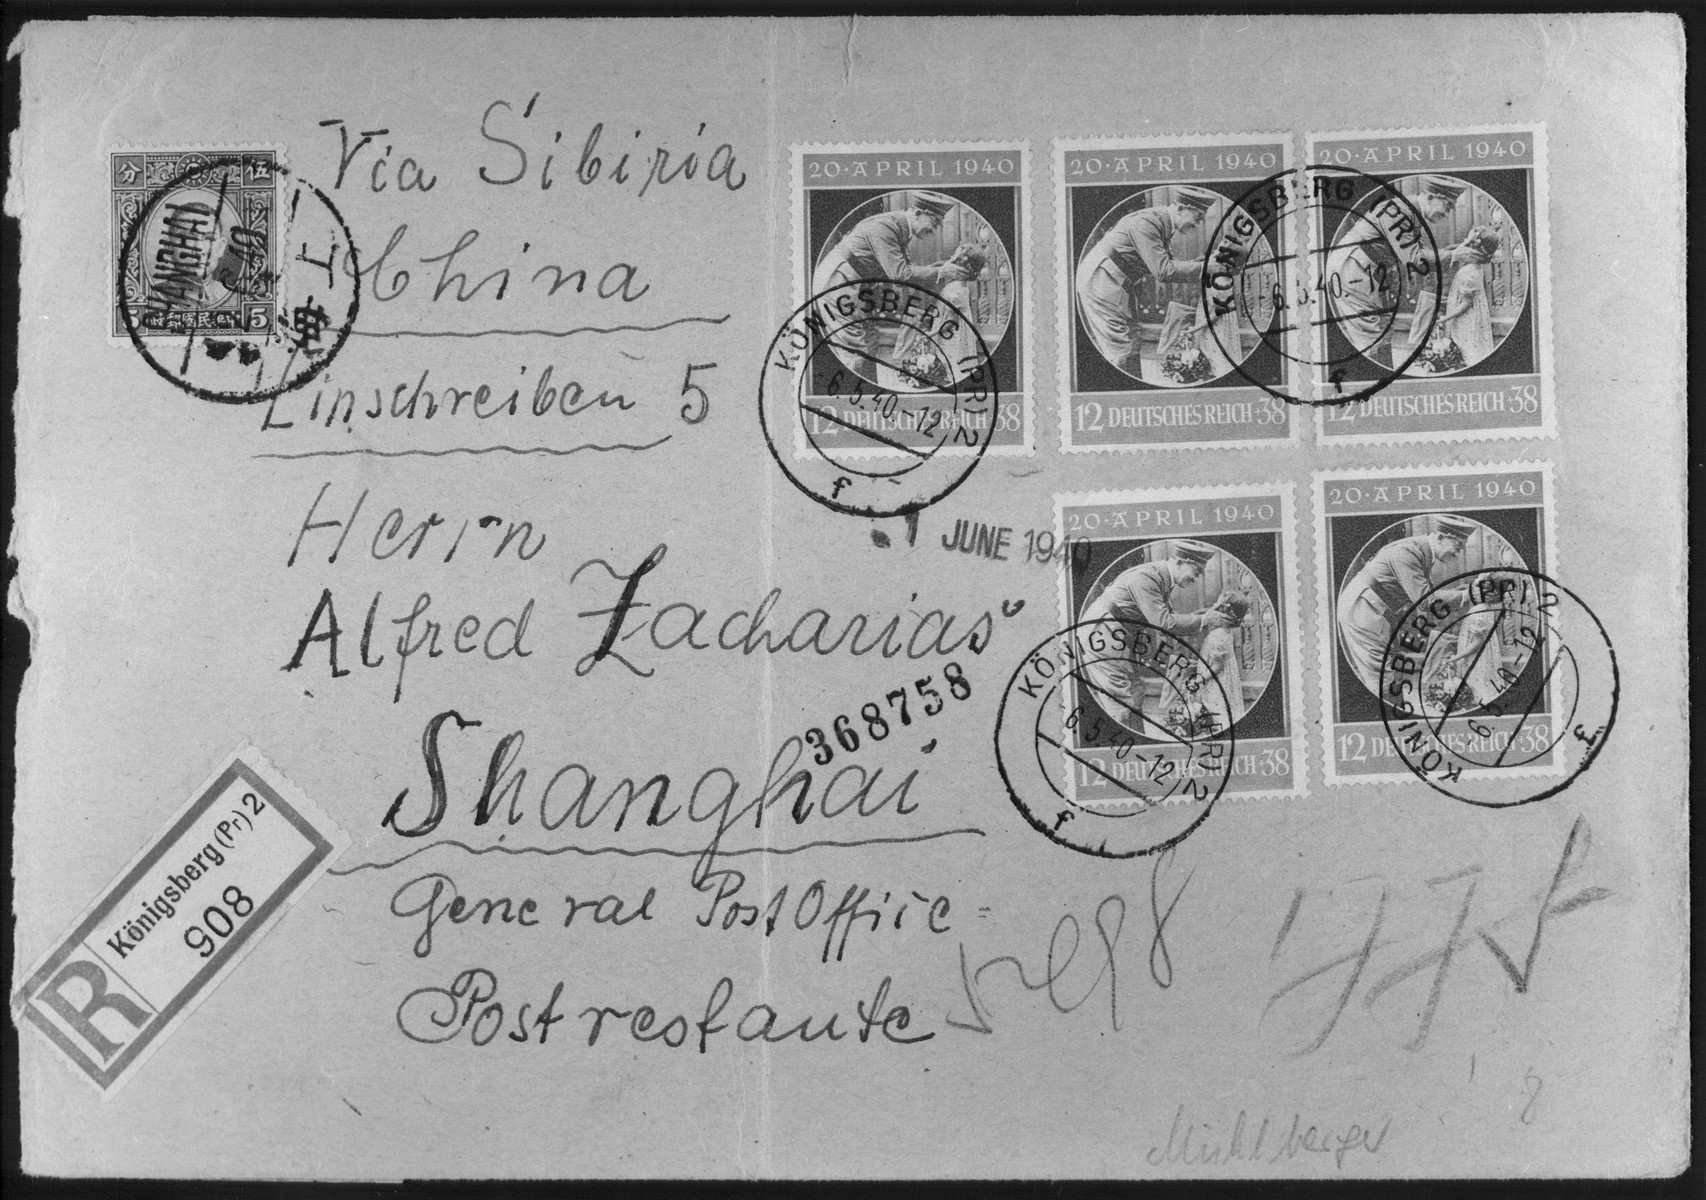 Postcard sent to Mr. Alfred Zacharias in Shanghai from Koenigsberg Germany by way of Siberia.